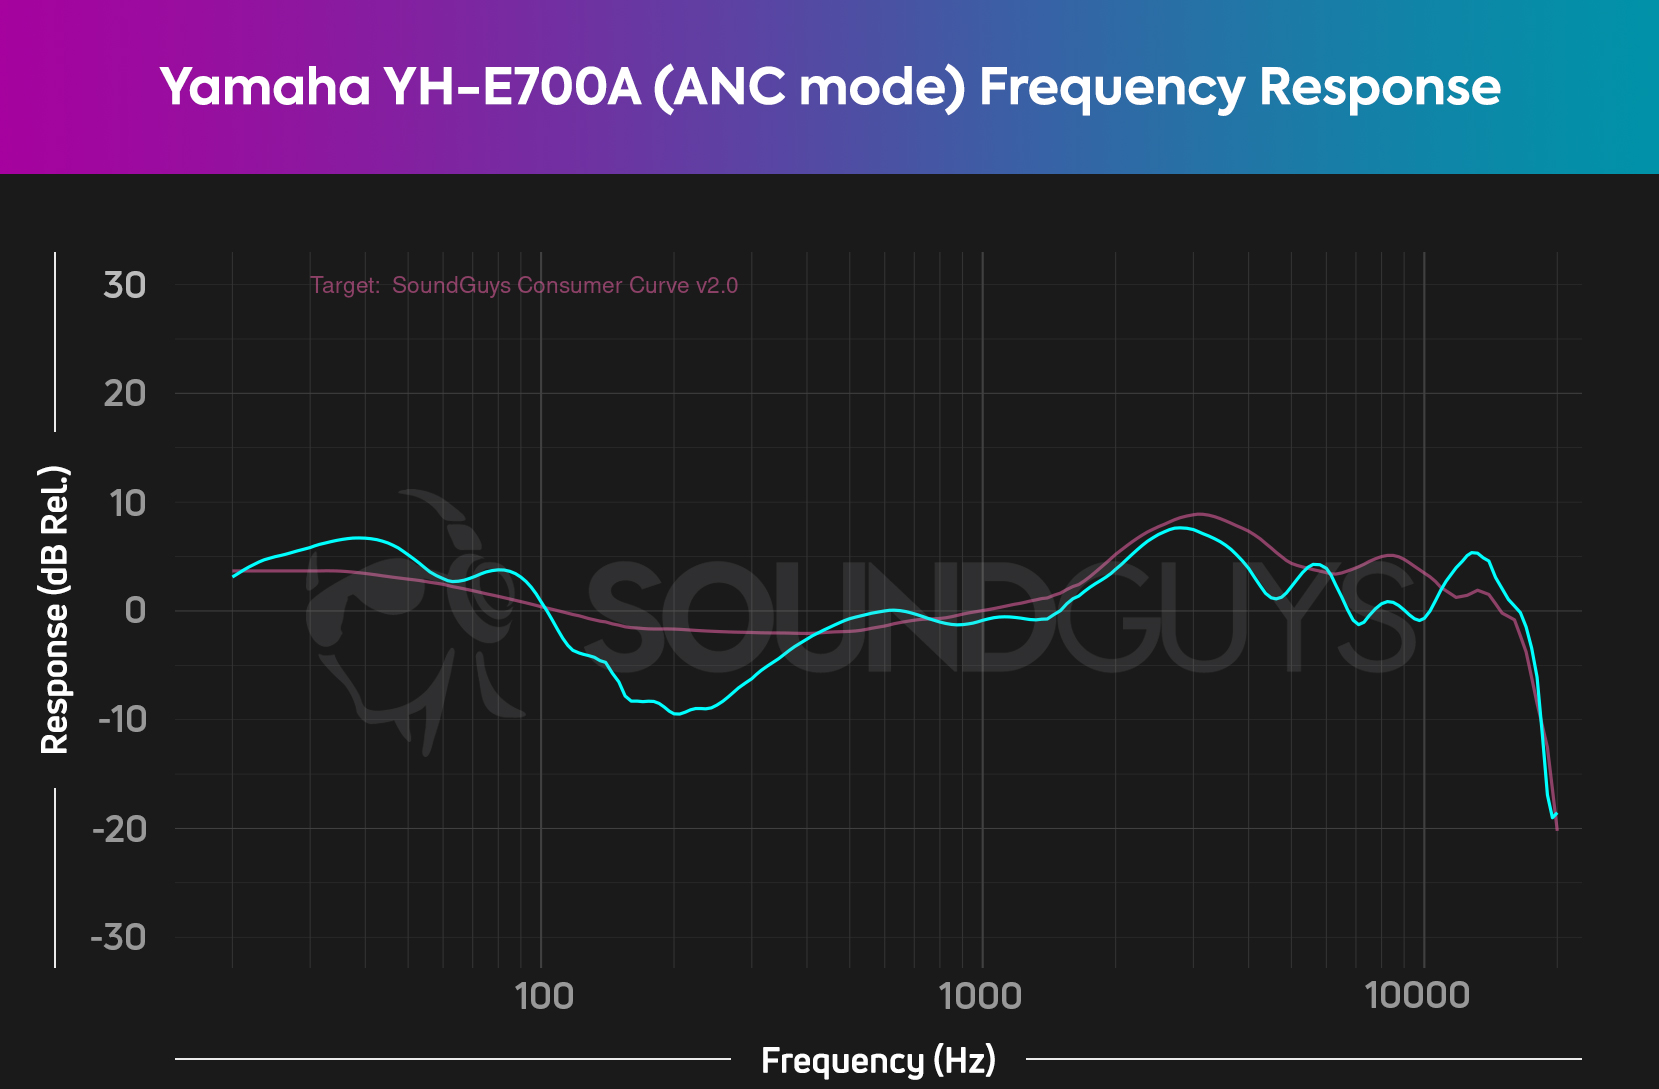 Chart depicts the frequency response of the Yamaha YH-E700A when ANC is on compared to our ideal.